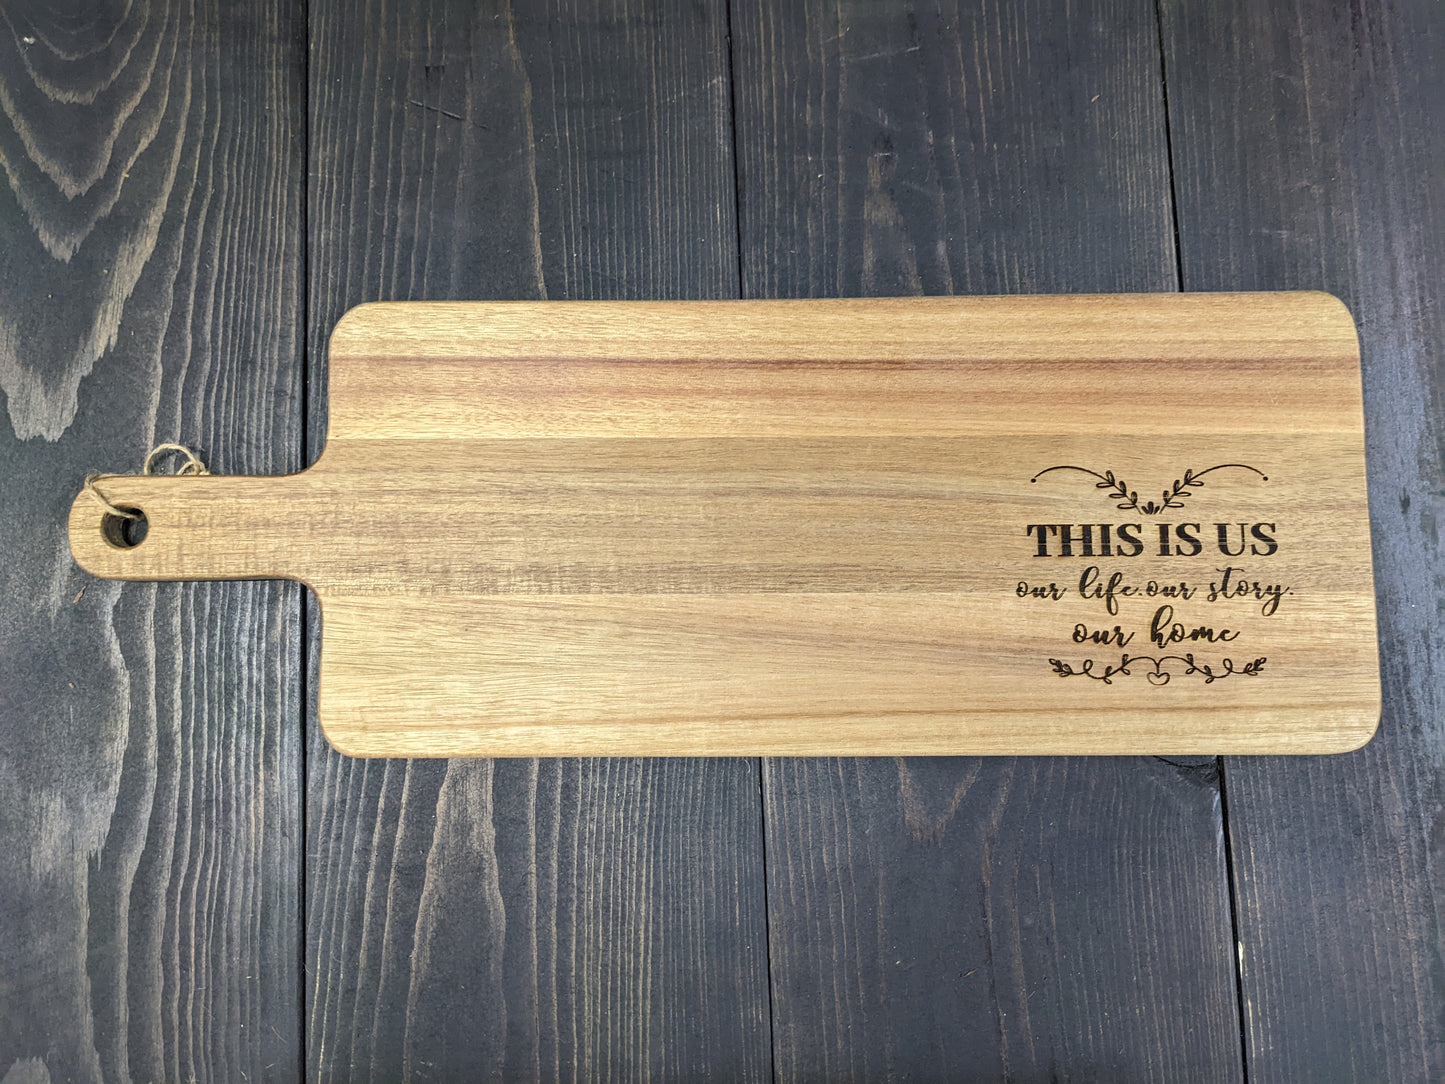 Cutting board- "This is us"